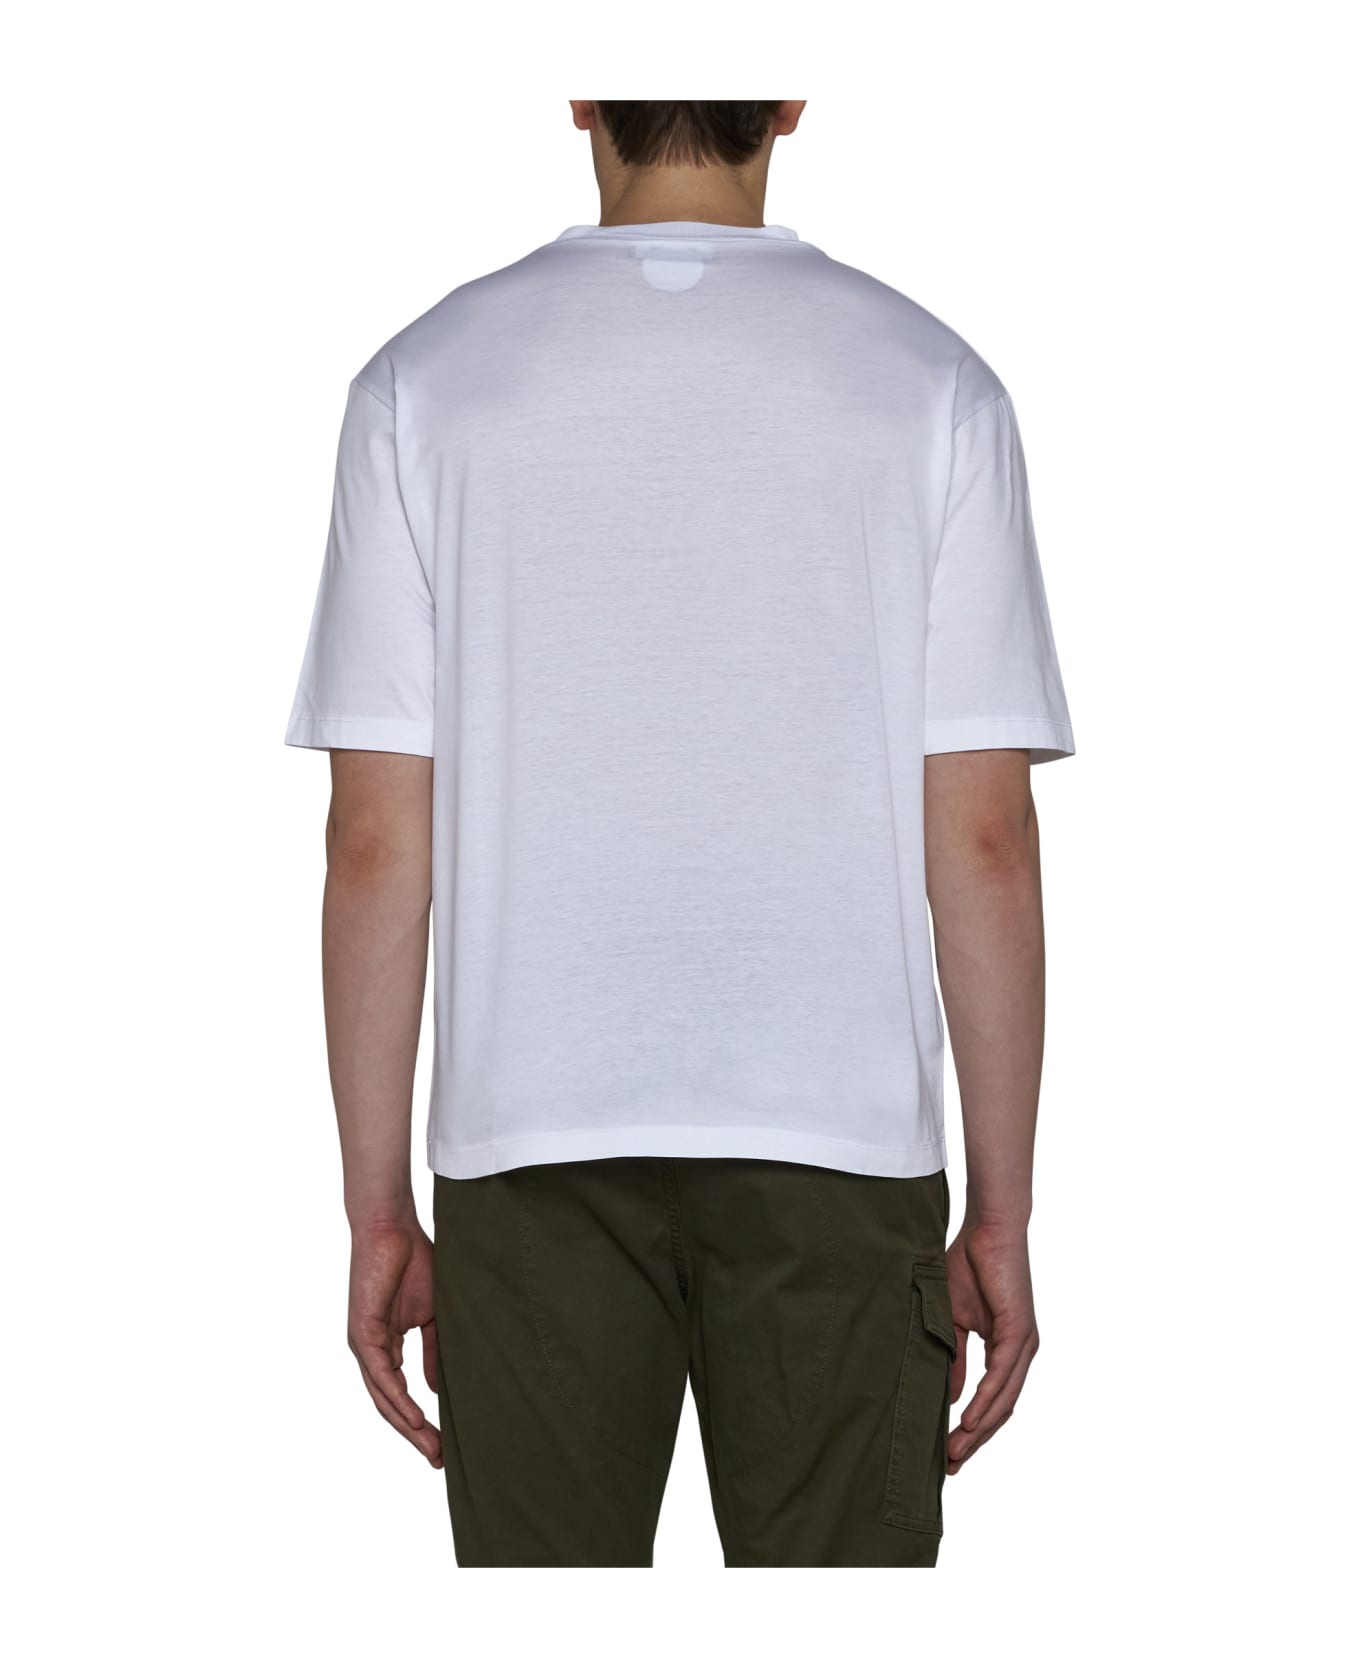 Dsquared2 Canadian Team Cool Fit T-shirt - White シャツ